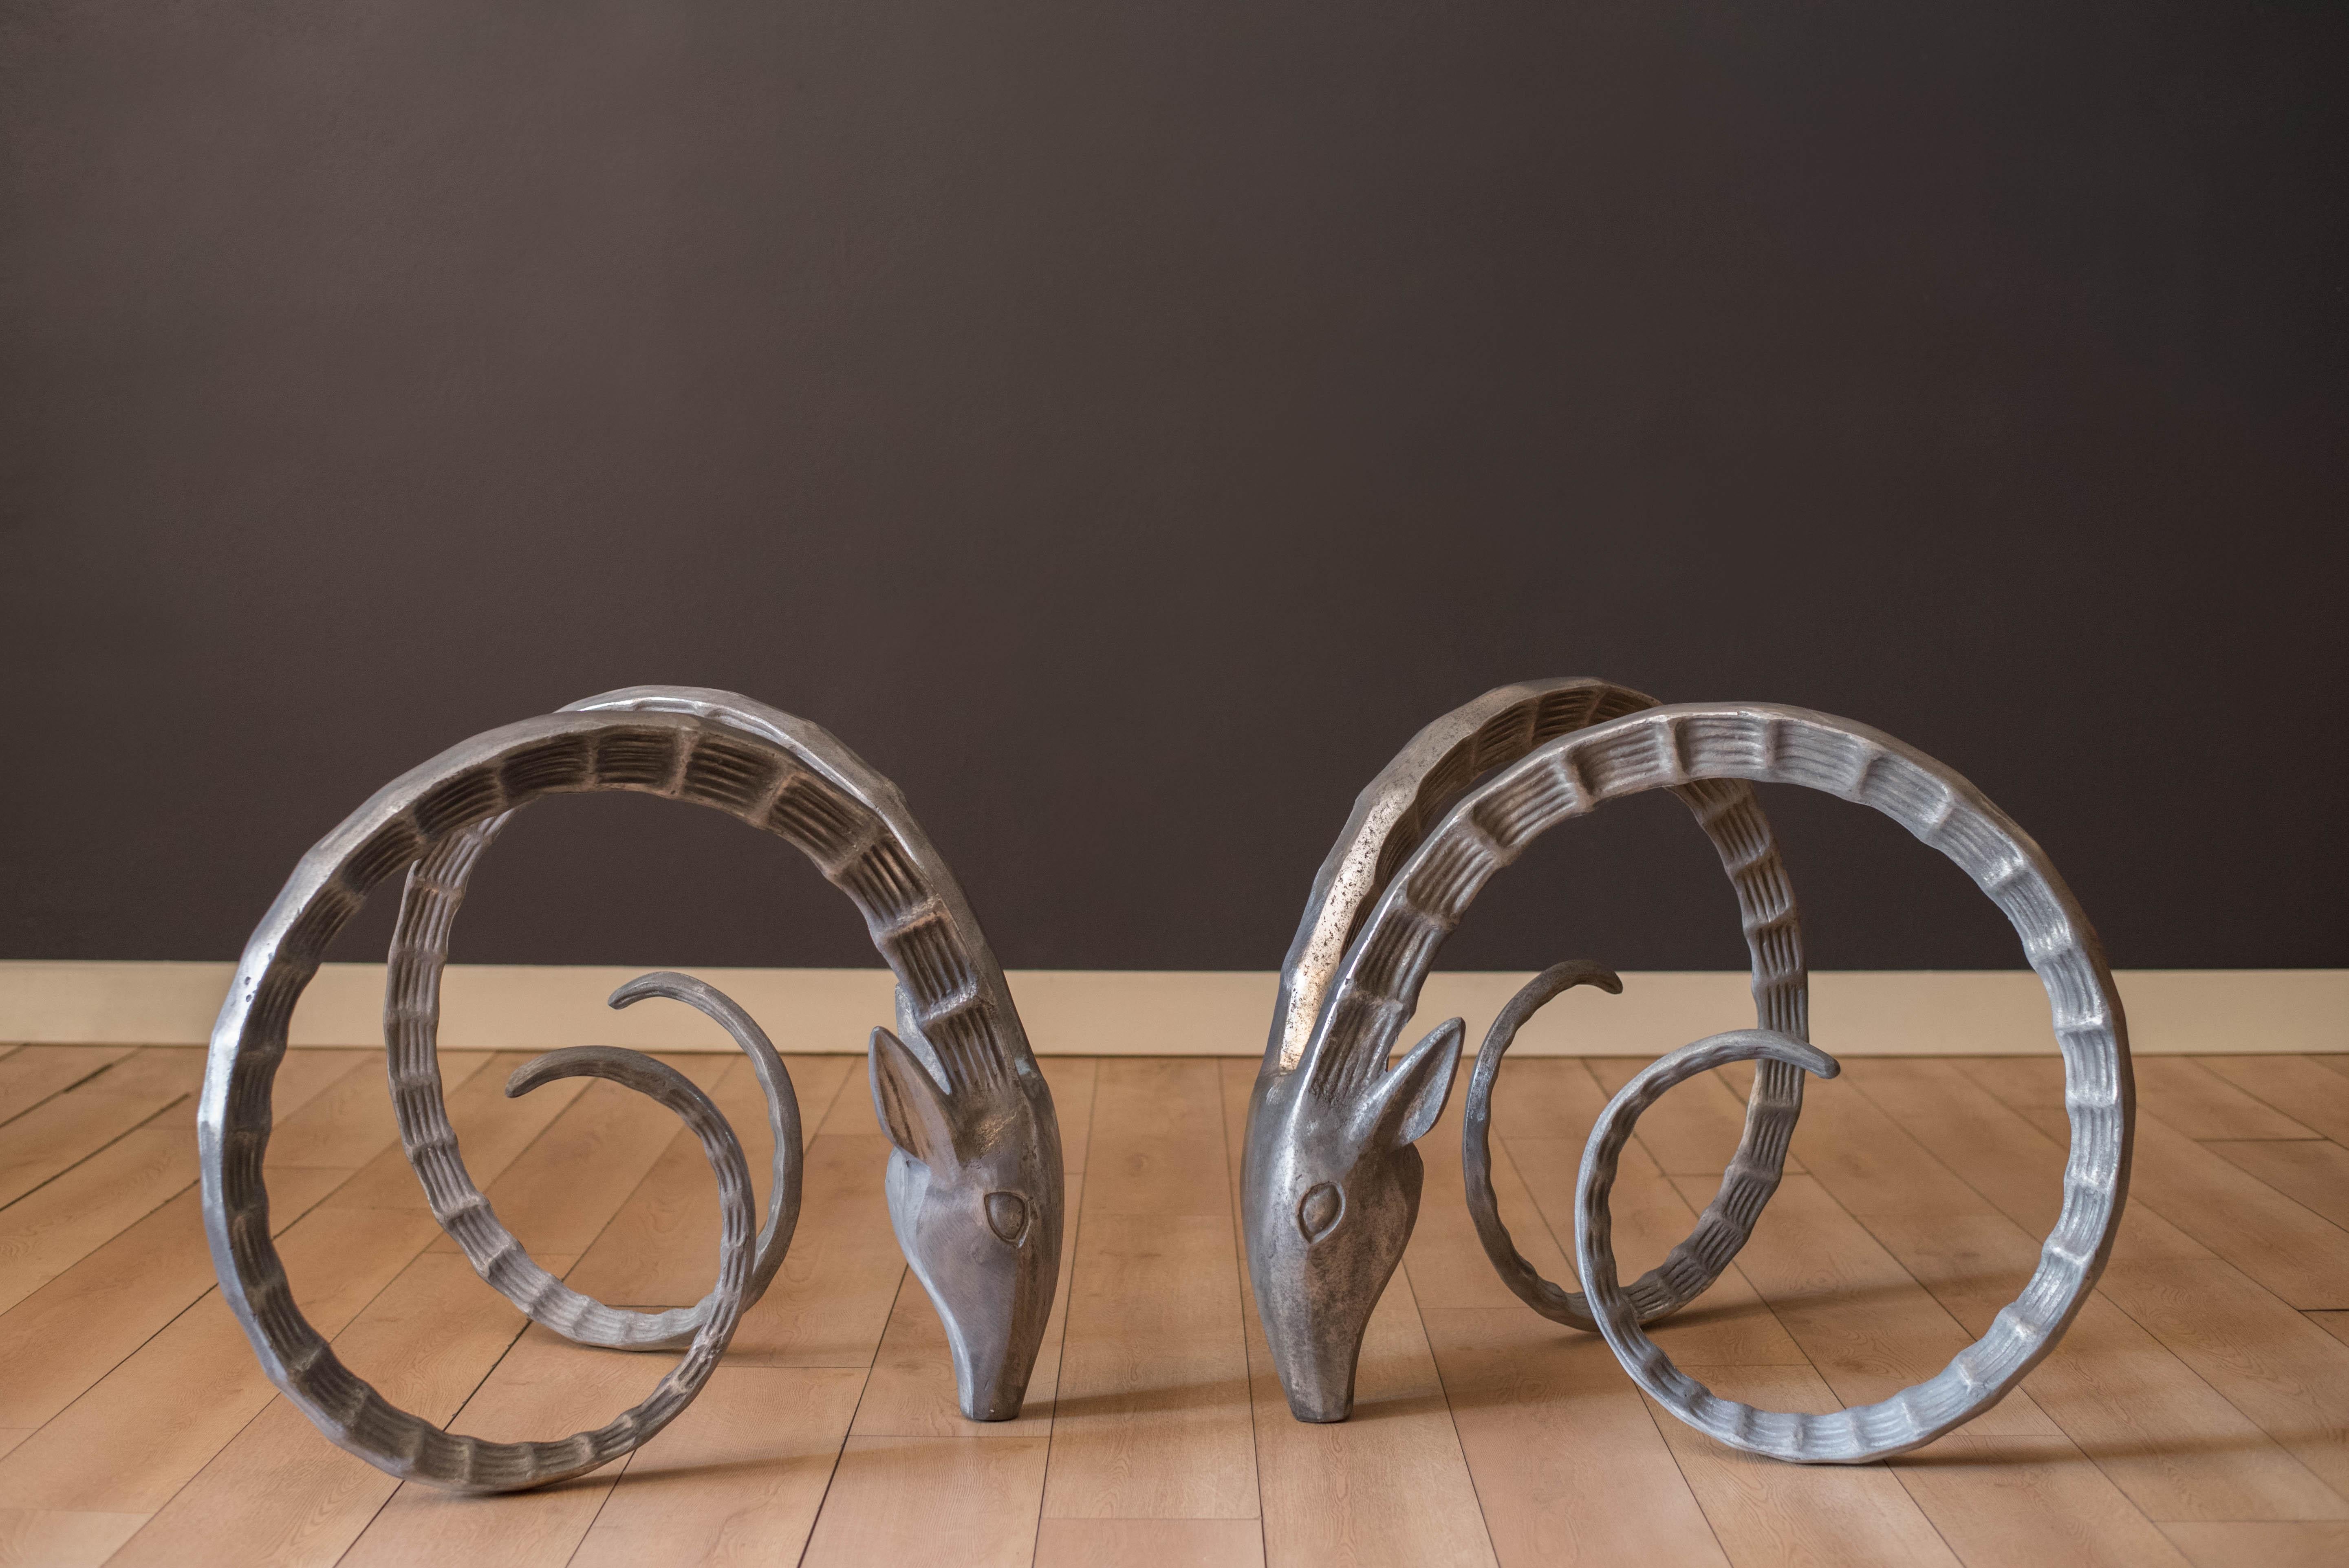 Vintage Ibex Rams head cast aluminum sculptures in the manner of Alain Chervet, circa 1970s. This sophisticated and dramatic focal point will be a statement piece in any interior dining room space. Price is for the bases only, glass top is not